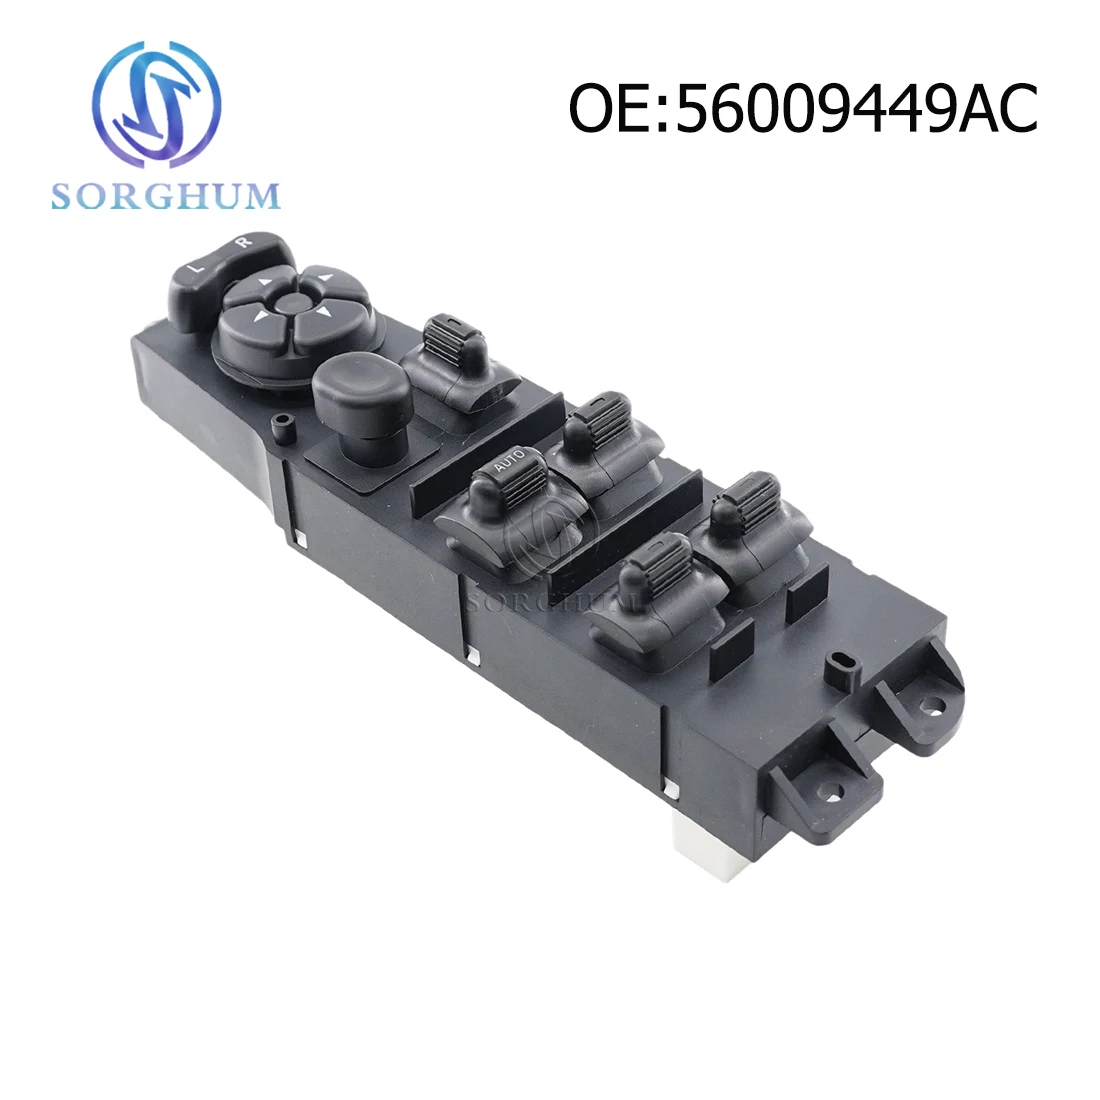 Sorghum 56009449AC 68171681AA  Master Power Control Pannel Window Switch  For Jeep Cherokee 4 Door 1997-2001 XJ Series Auto Part